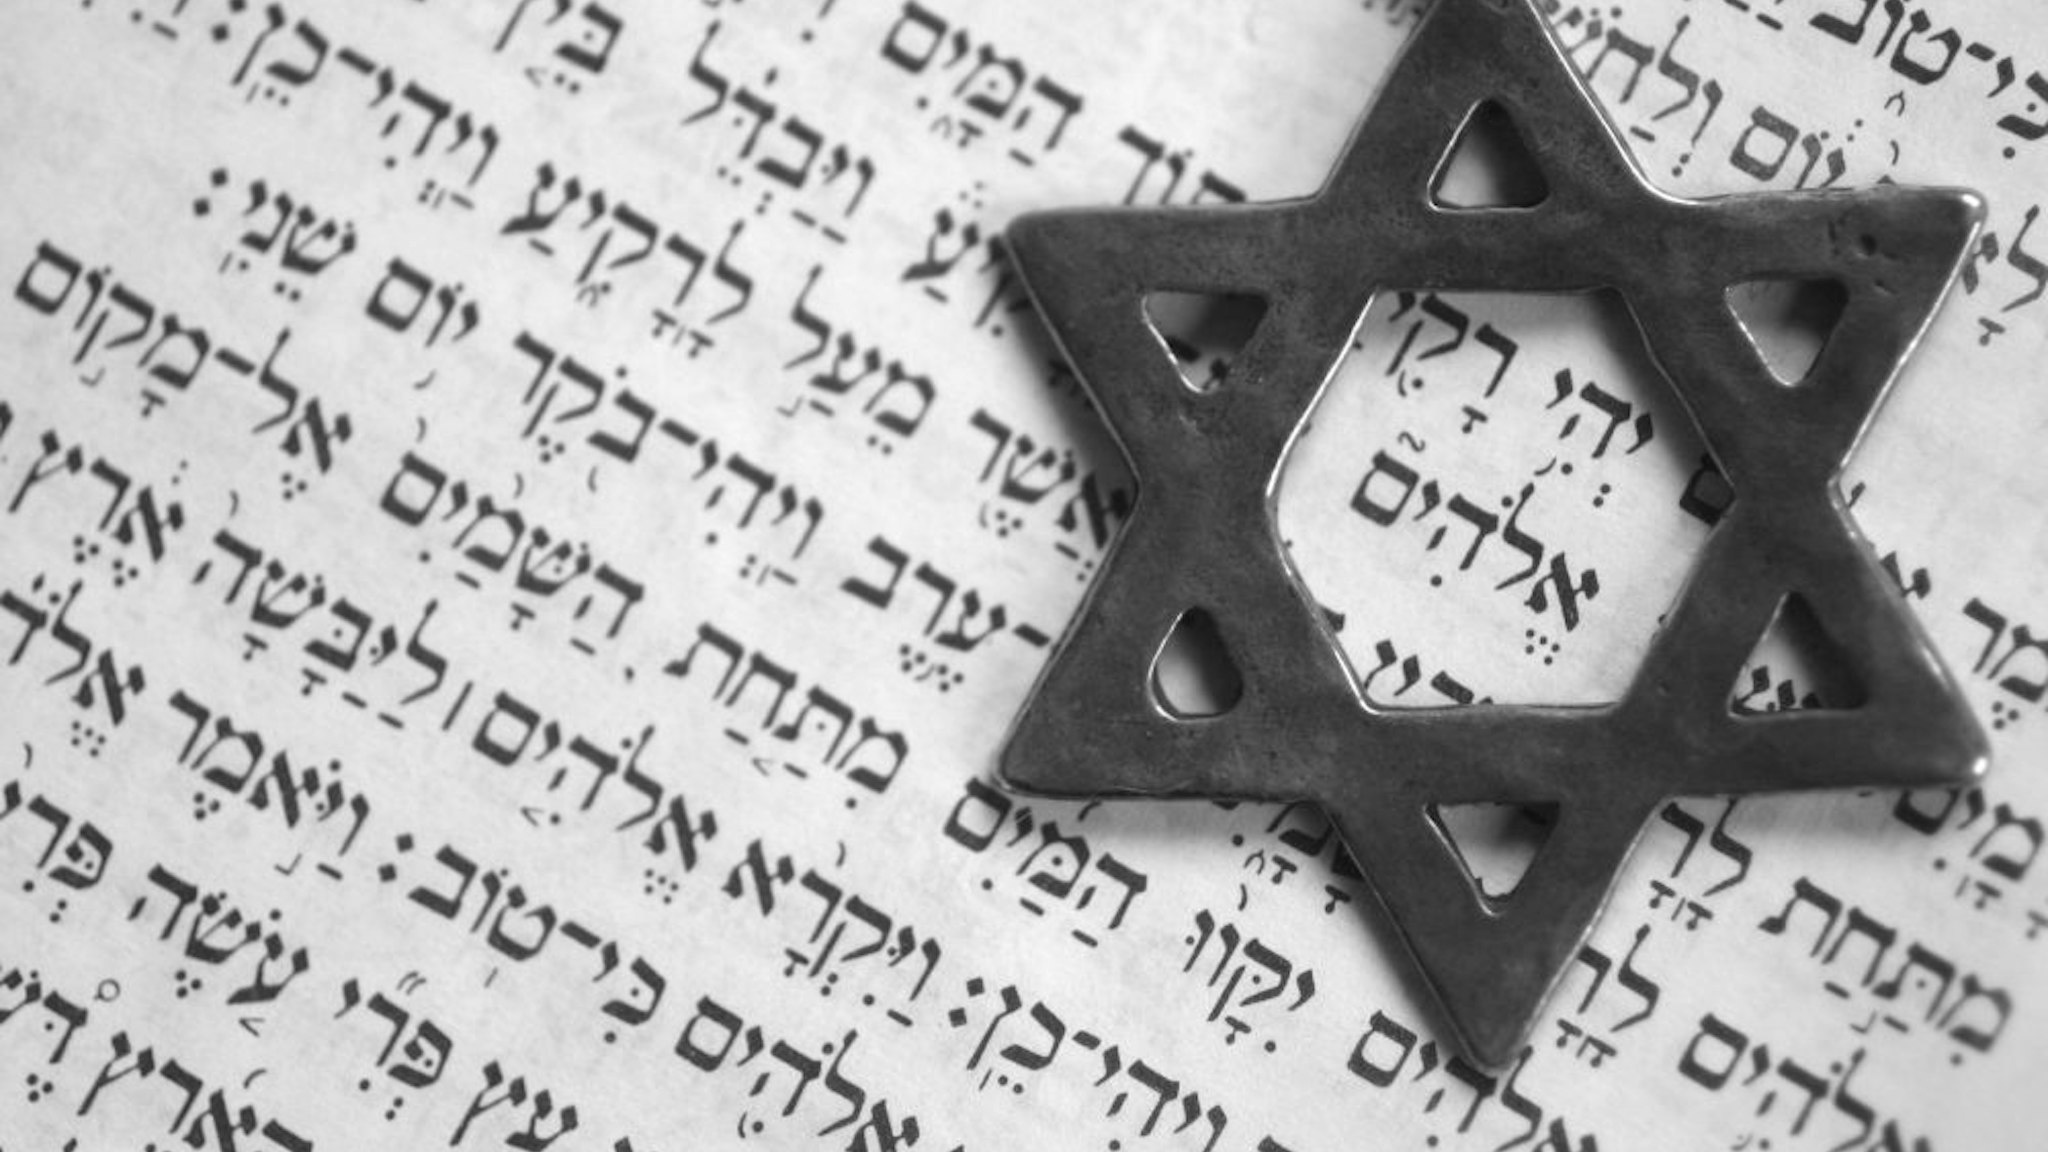 Star of David over the first page of the old testament in Hebrew. The word in the center of the star means "God".